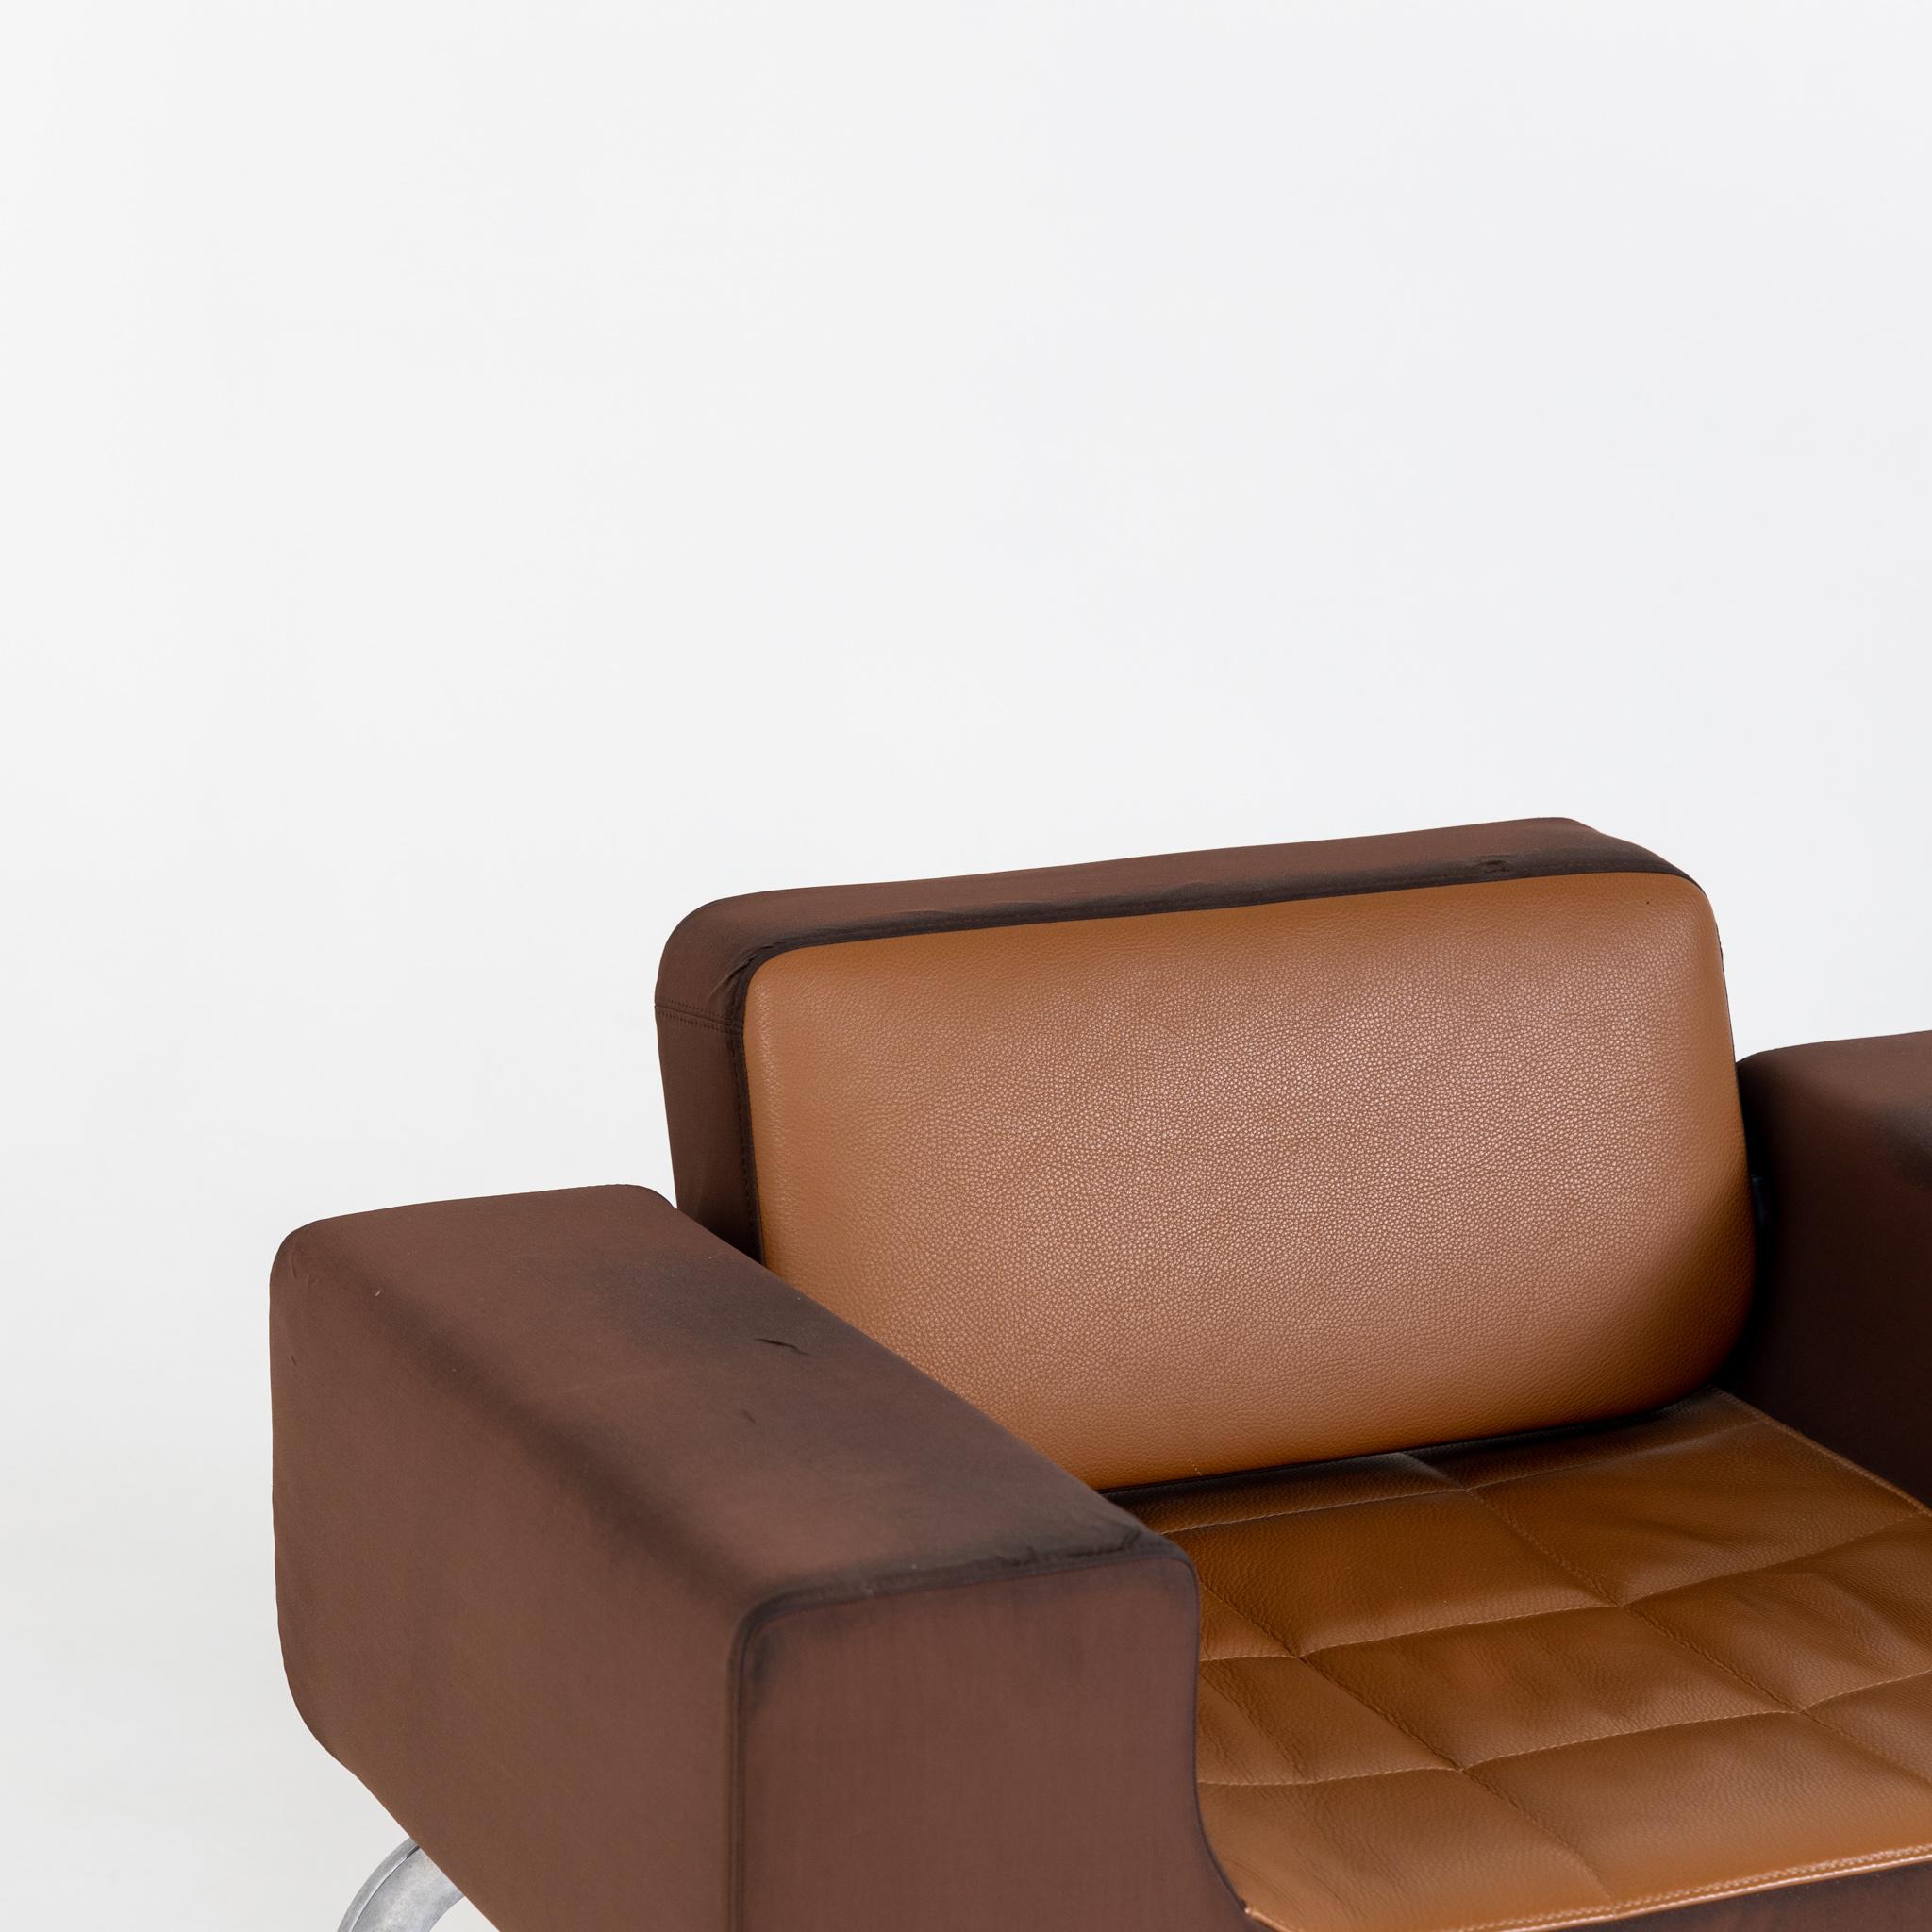 Pair of Brown Lounge Chairs, Fabric and Metal, Italy 1970s For Sale 8